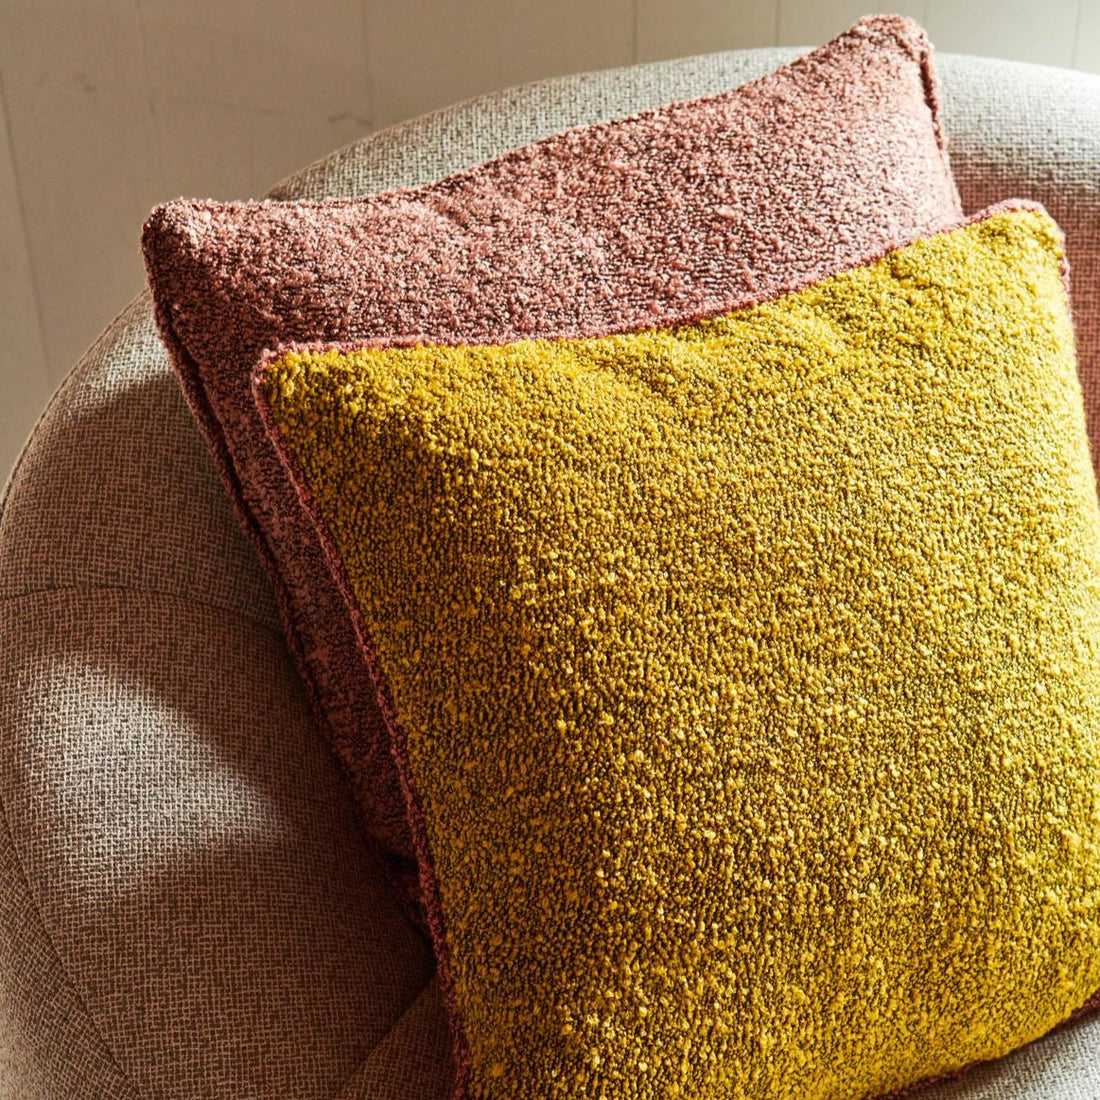 Chartreuse Square Boucle Cushion